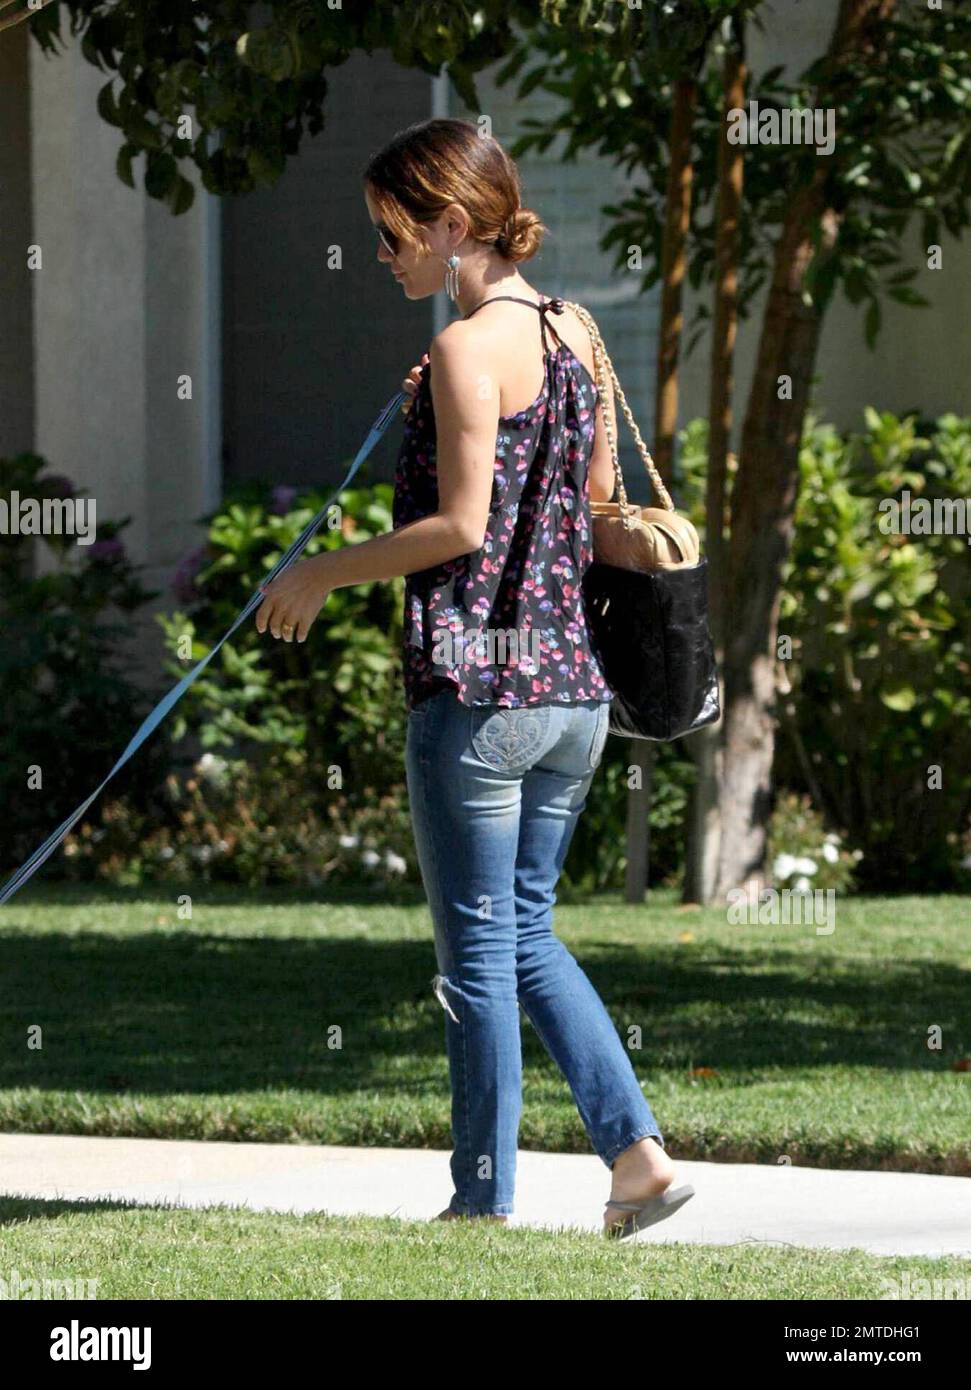 Exclusive!! Rachel Bilson was seen attending a luncheon with family and friends in a suburban Los Angeles neighborhood today.  She had her dog Thurmen Murmen along for the ride.  Speculation persists about the status of Rachel's relationship with actor Hayden Christensen and whether the two are engaged.  Los Angeles, CA.  9/8/08. Stock Photo